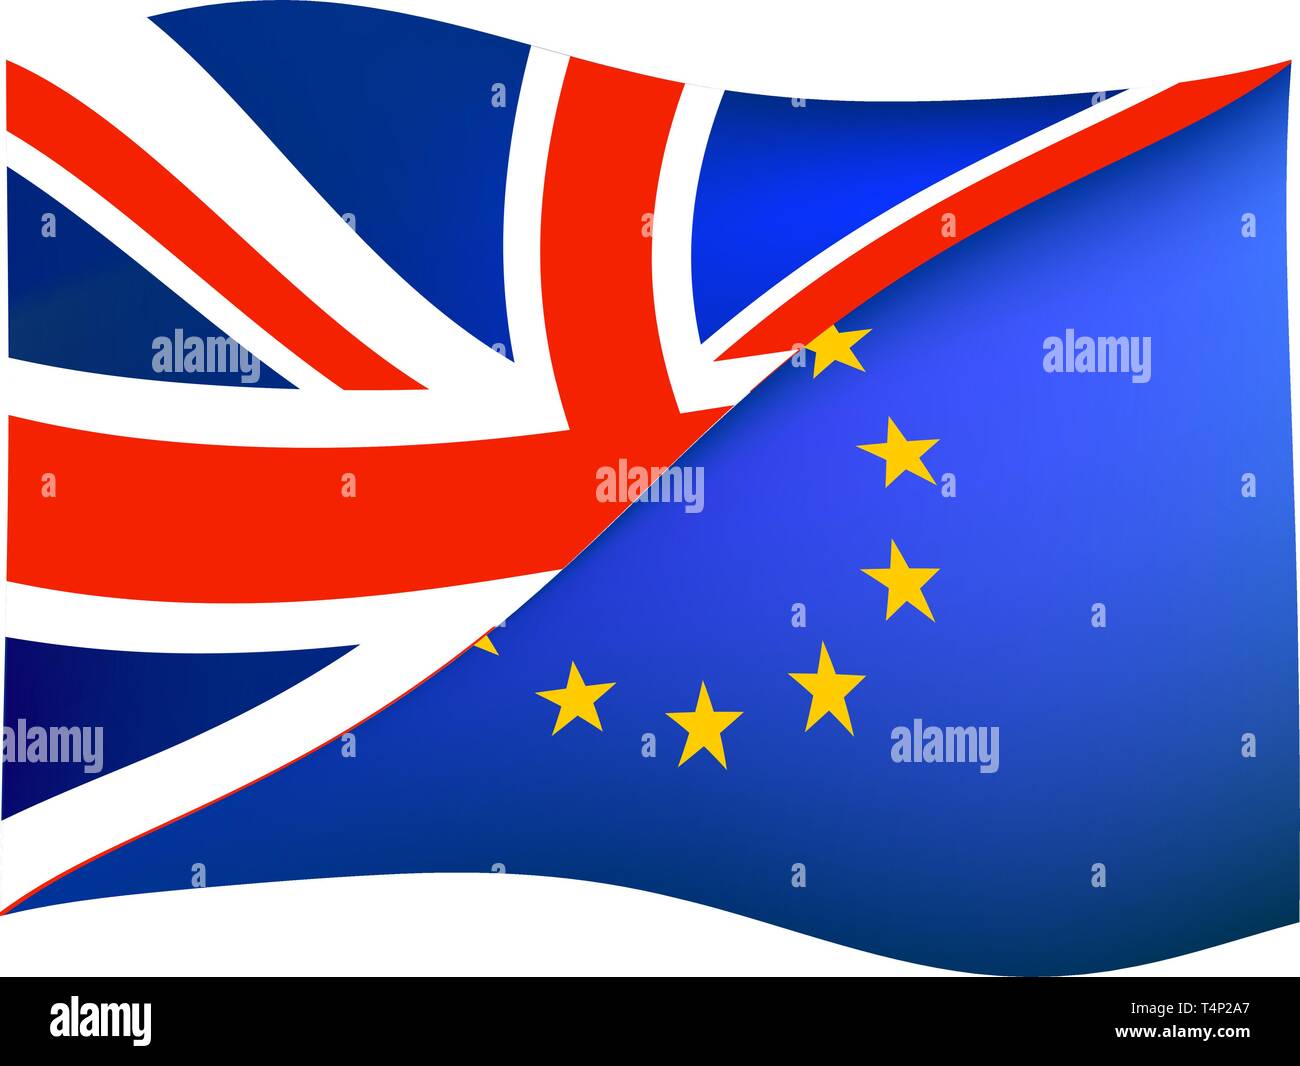 brexit concept with union jack united kingdom flag and european union flag Stock Vector